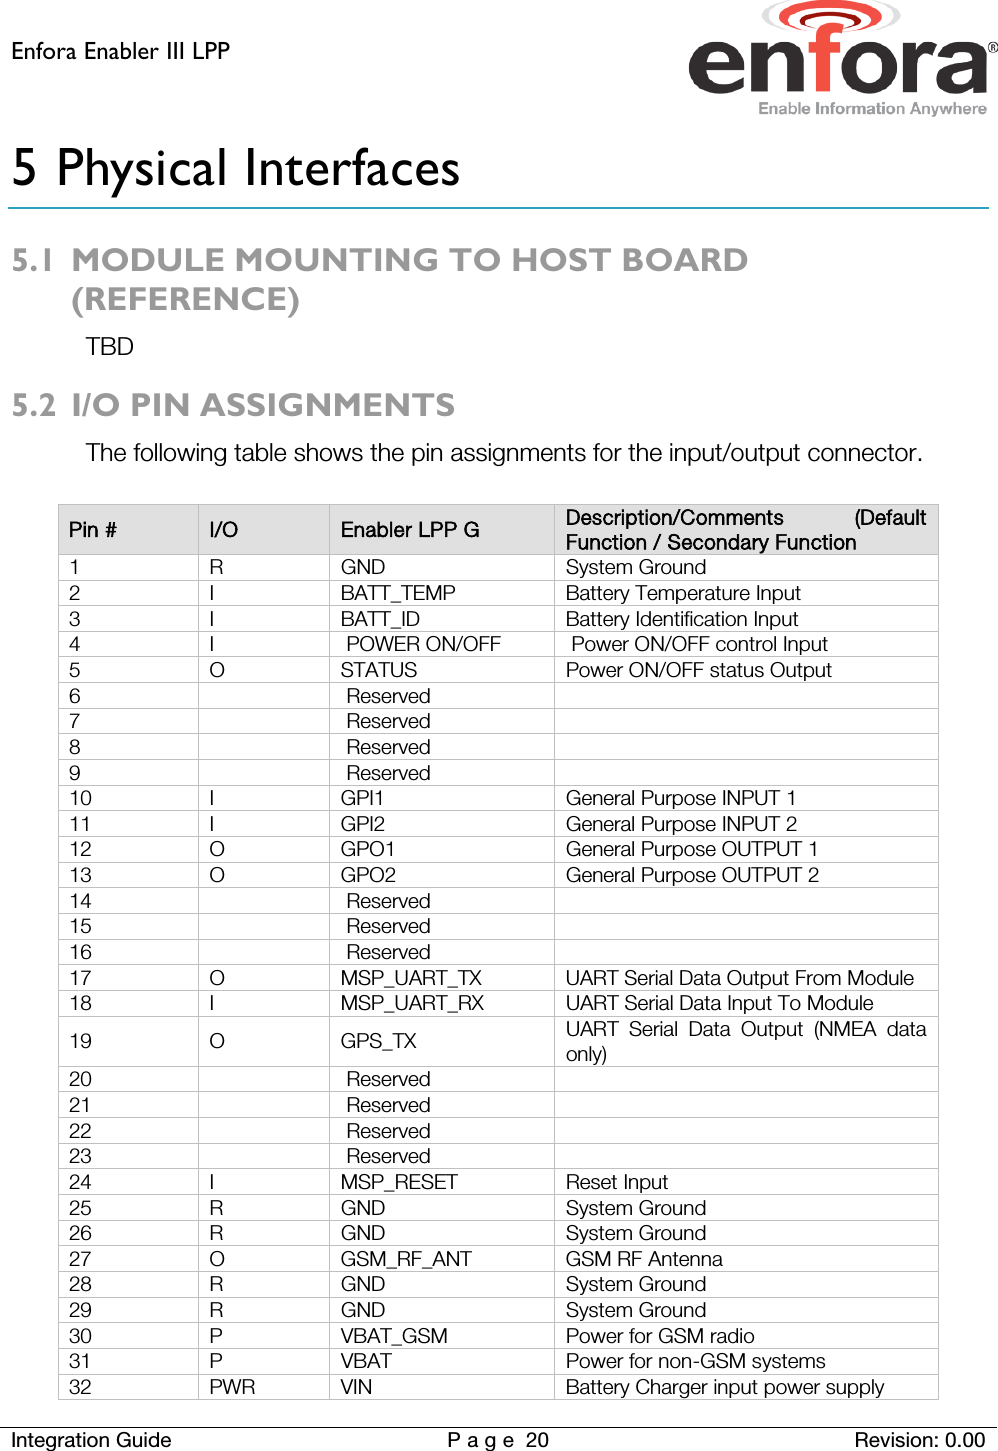 Enfora Enabler III LPP    Integration Guide Page 20 Revision: 0.00  5 Physical Interfaces 5.1 MODULE MOUNTING TO HOST BOARD (REFERENCE) TBD 5.2 I/O PIN ASSIGNMENTS The following table shows the pin assignments for the input/output connector.    Pin # I/O Enabler LPP G Description/Comments (Default Function / Secondary Function 1  R  GND System Ground 2  I  BATT_TEMP Battery Temperature Input 3  I  BATT_ID Battery Identification Input 4  I   POWER ON/OFF   Power ON/OFF control Input 5  O  STATUS Power ON/OFF status Output 6     Reserved   7     Reserved   8     Reserved   9     Reserved   10  I  GPI1 General Purpose INPUT 1 11  I  GPI2 General Purpose INPUT 2 12  O  GPO1 General Purpose OUTPUT 1 13  O  GPO2 General Purpose OUTPUT 2 14     Reserved   15     Reserved   16     Reserved   17  O  MSP_UART_TX UART Serial Data Output From Module 18  I  MSP_UART_RX UART Serial Data Input To Module 19  O  GPS_TX UART Serial Data Output (NMEA data only) 20     Reserved   21     Reserved   22     Reserved   23     Reserved   24  I  MSP_RESET Reset Input 25  R  GND System Ground 26  R  GND System Ground 27  O  GSM_RF_ANT GSM RF Antenna 28  R  GND System Ground 29  R  GND System Ground 30  P  VBAT_GSM Power for GSM radio 31  P  VBAT Power for non-GSM systems 32 PWR VIN Battery Charger input power supply 